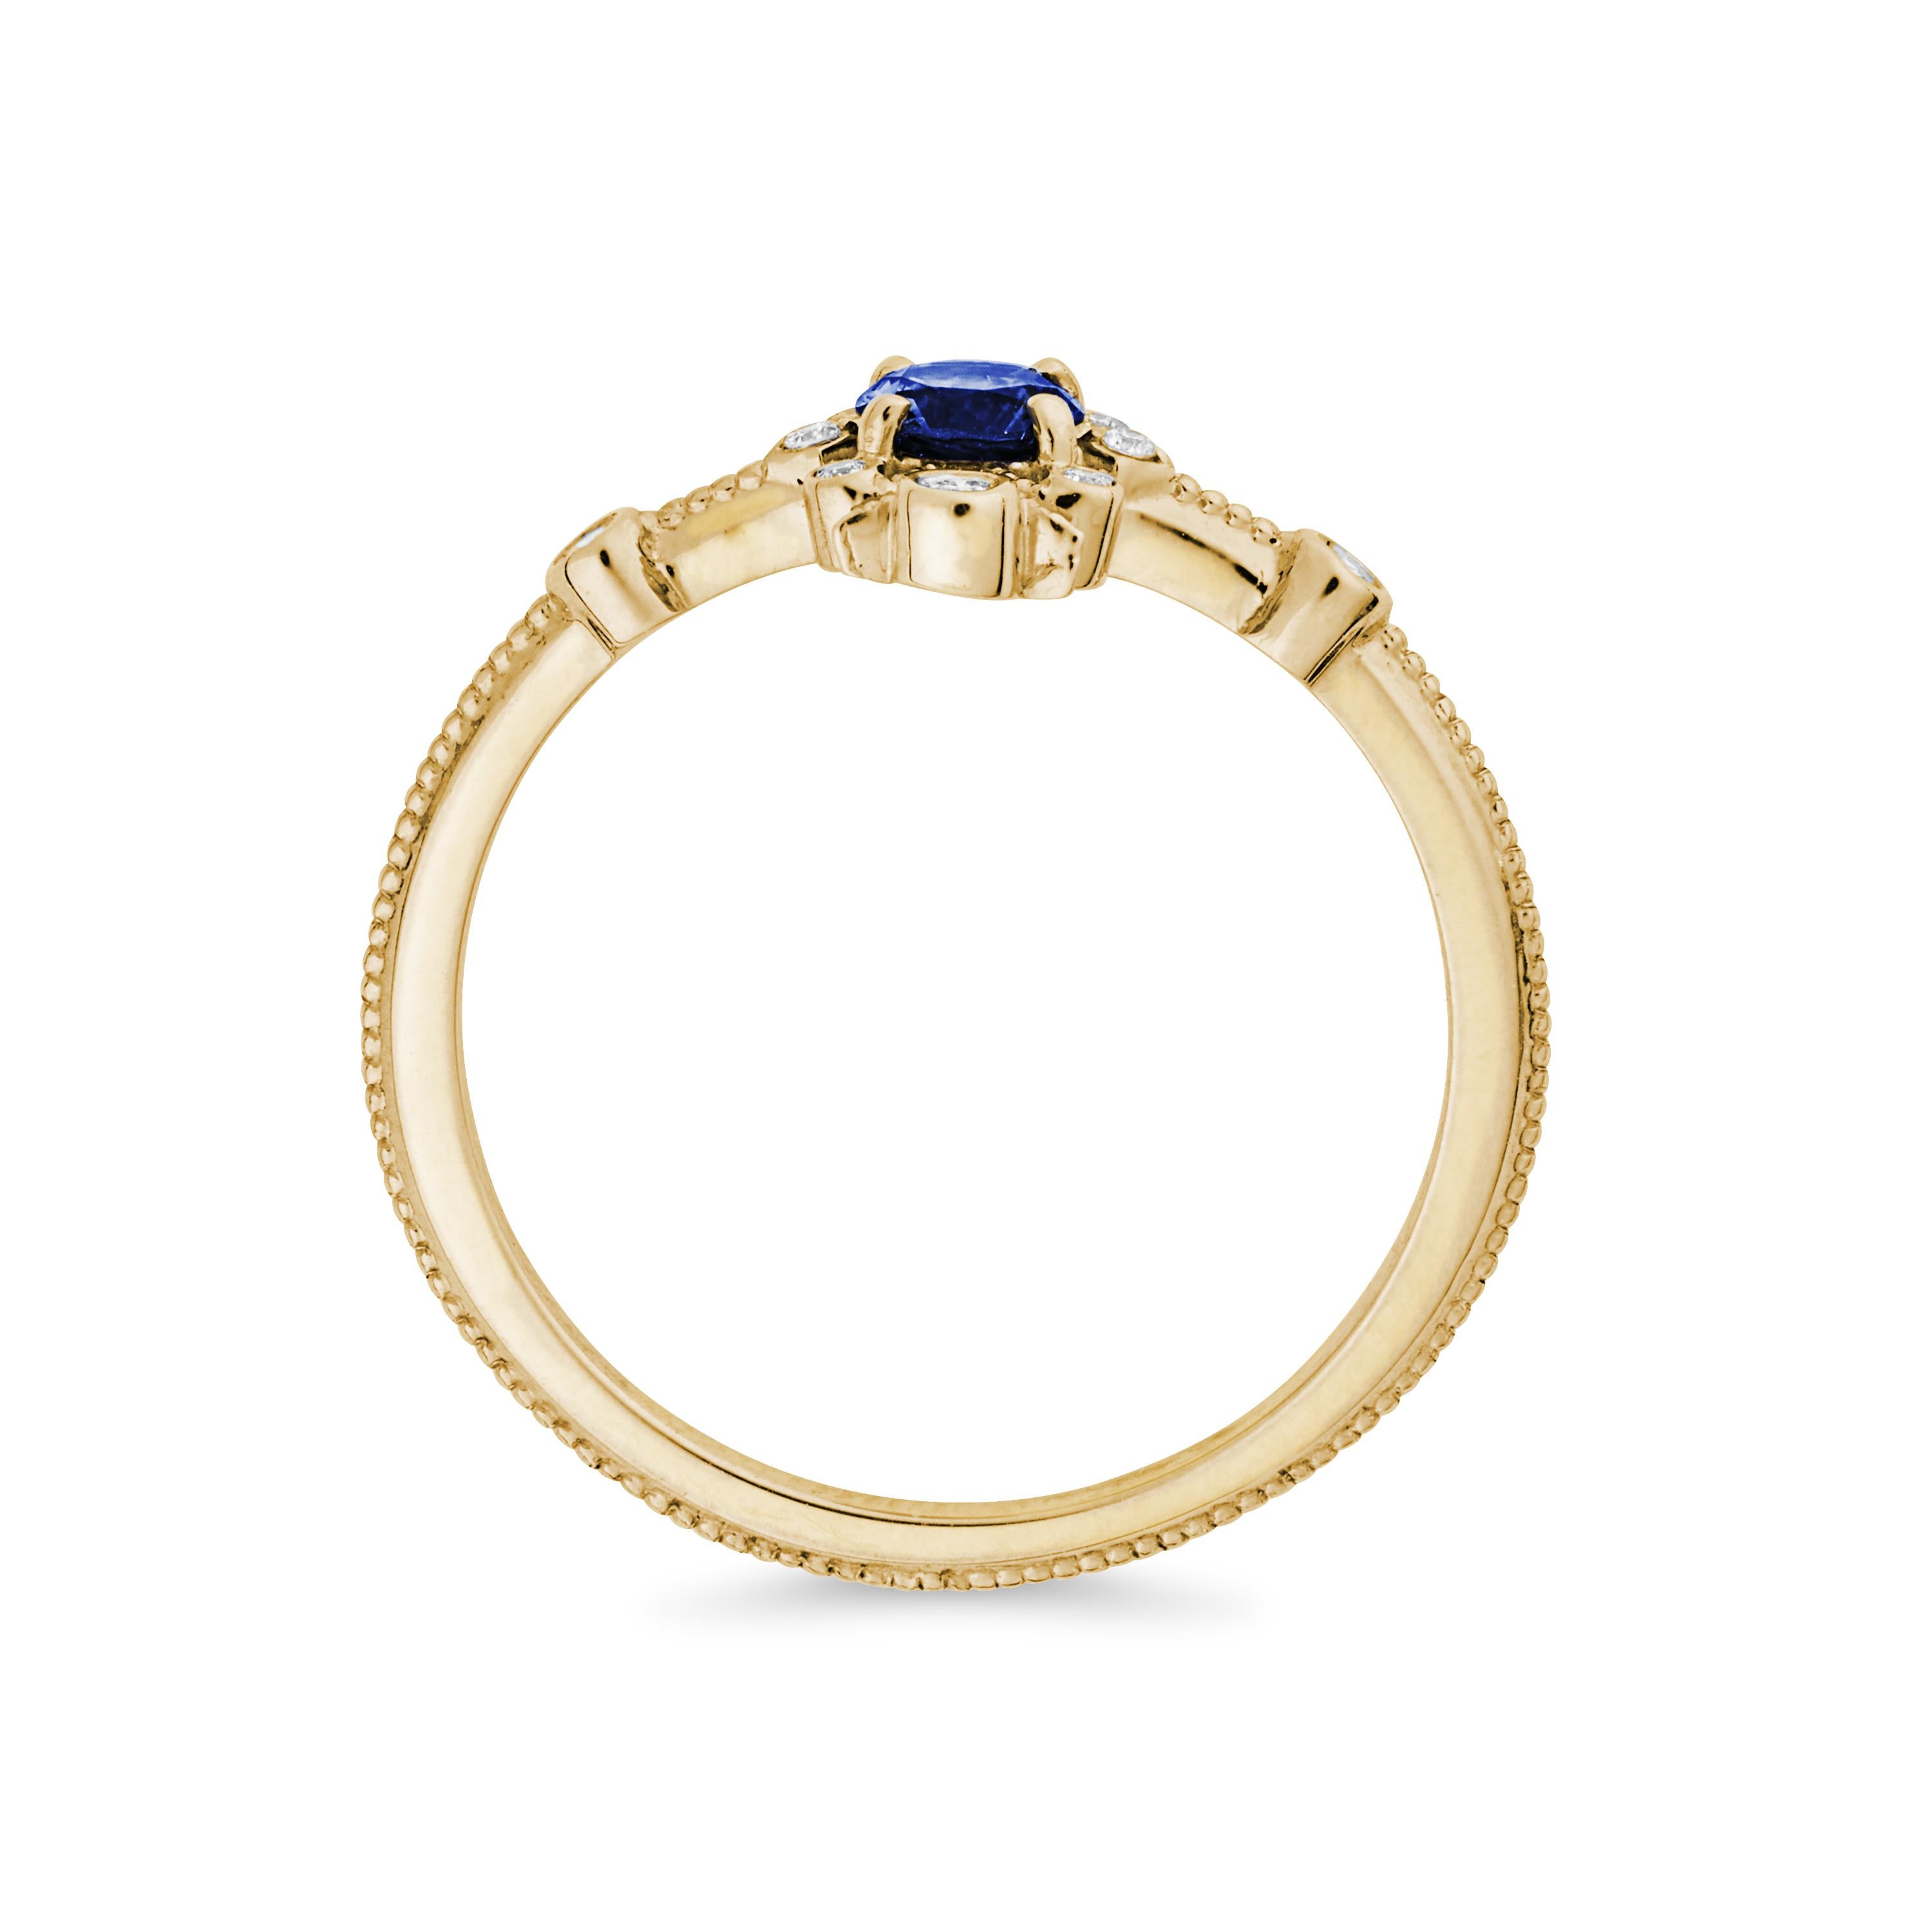 This 14K yellow gold band features a fair trade blue sapphire with accent diamonds.

Materials + Dimensions: 14k yellow gold, 4mm blue sapphire center stone, .03 ctw diamonds